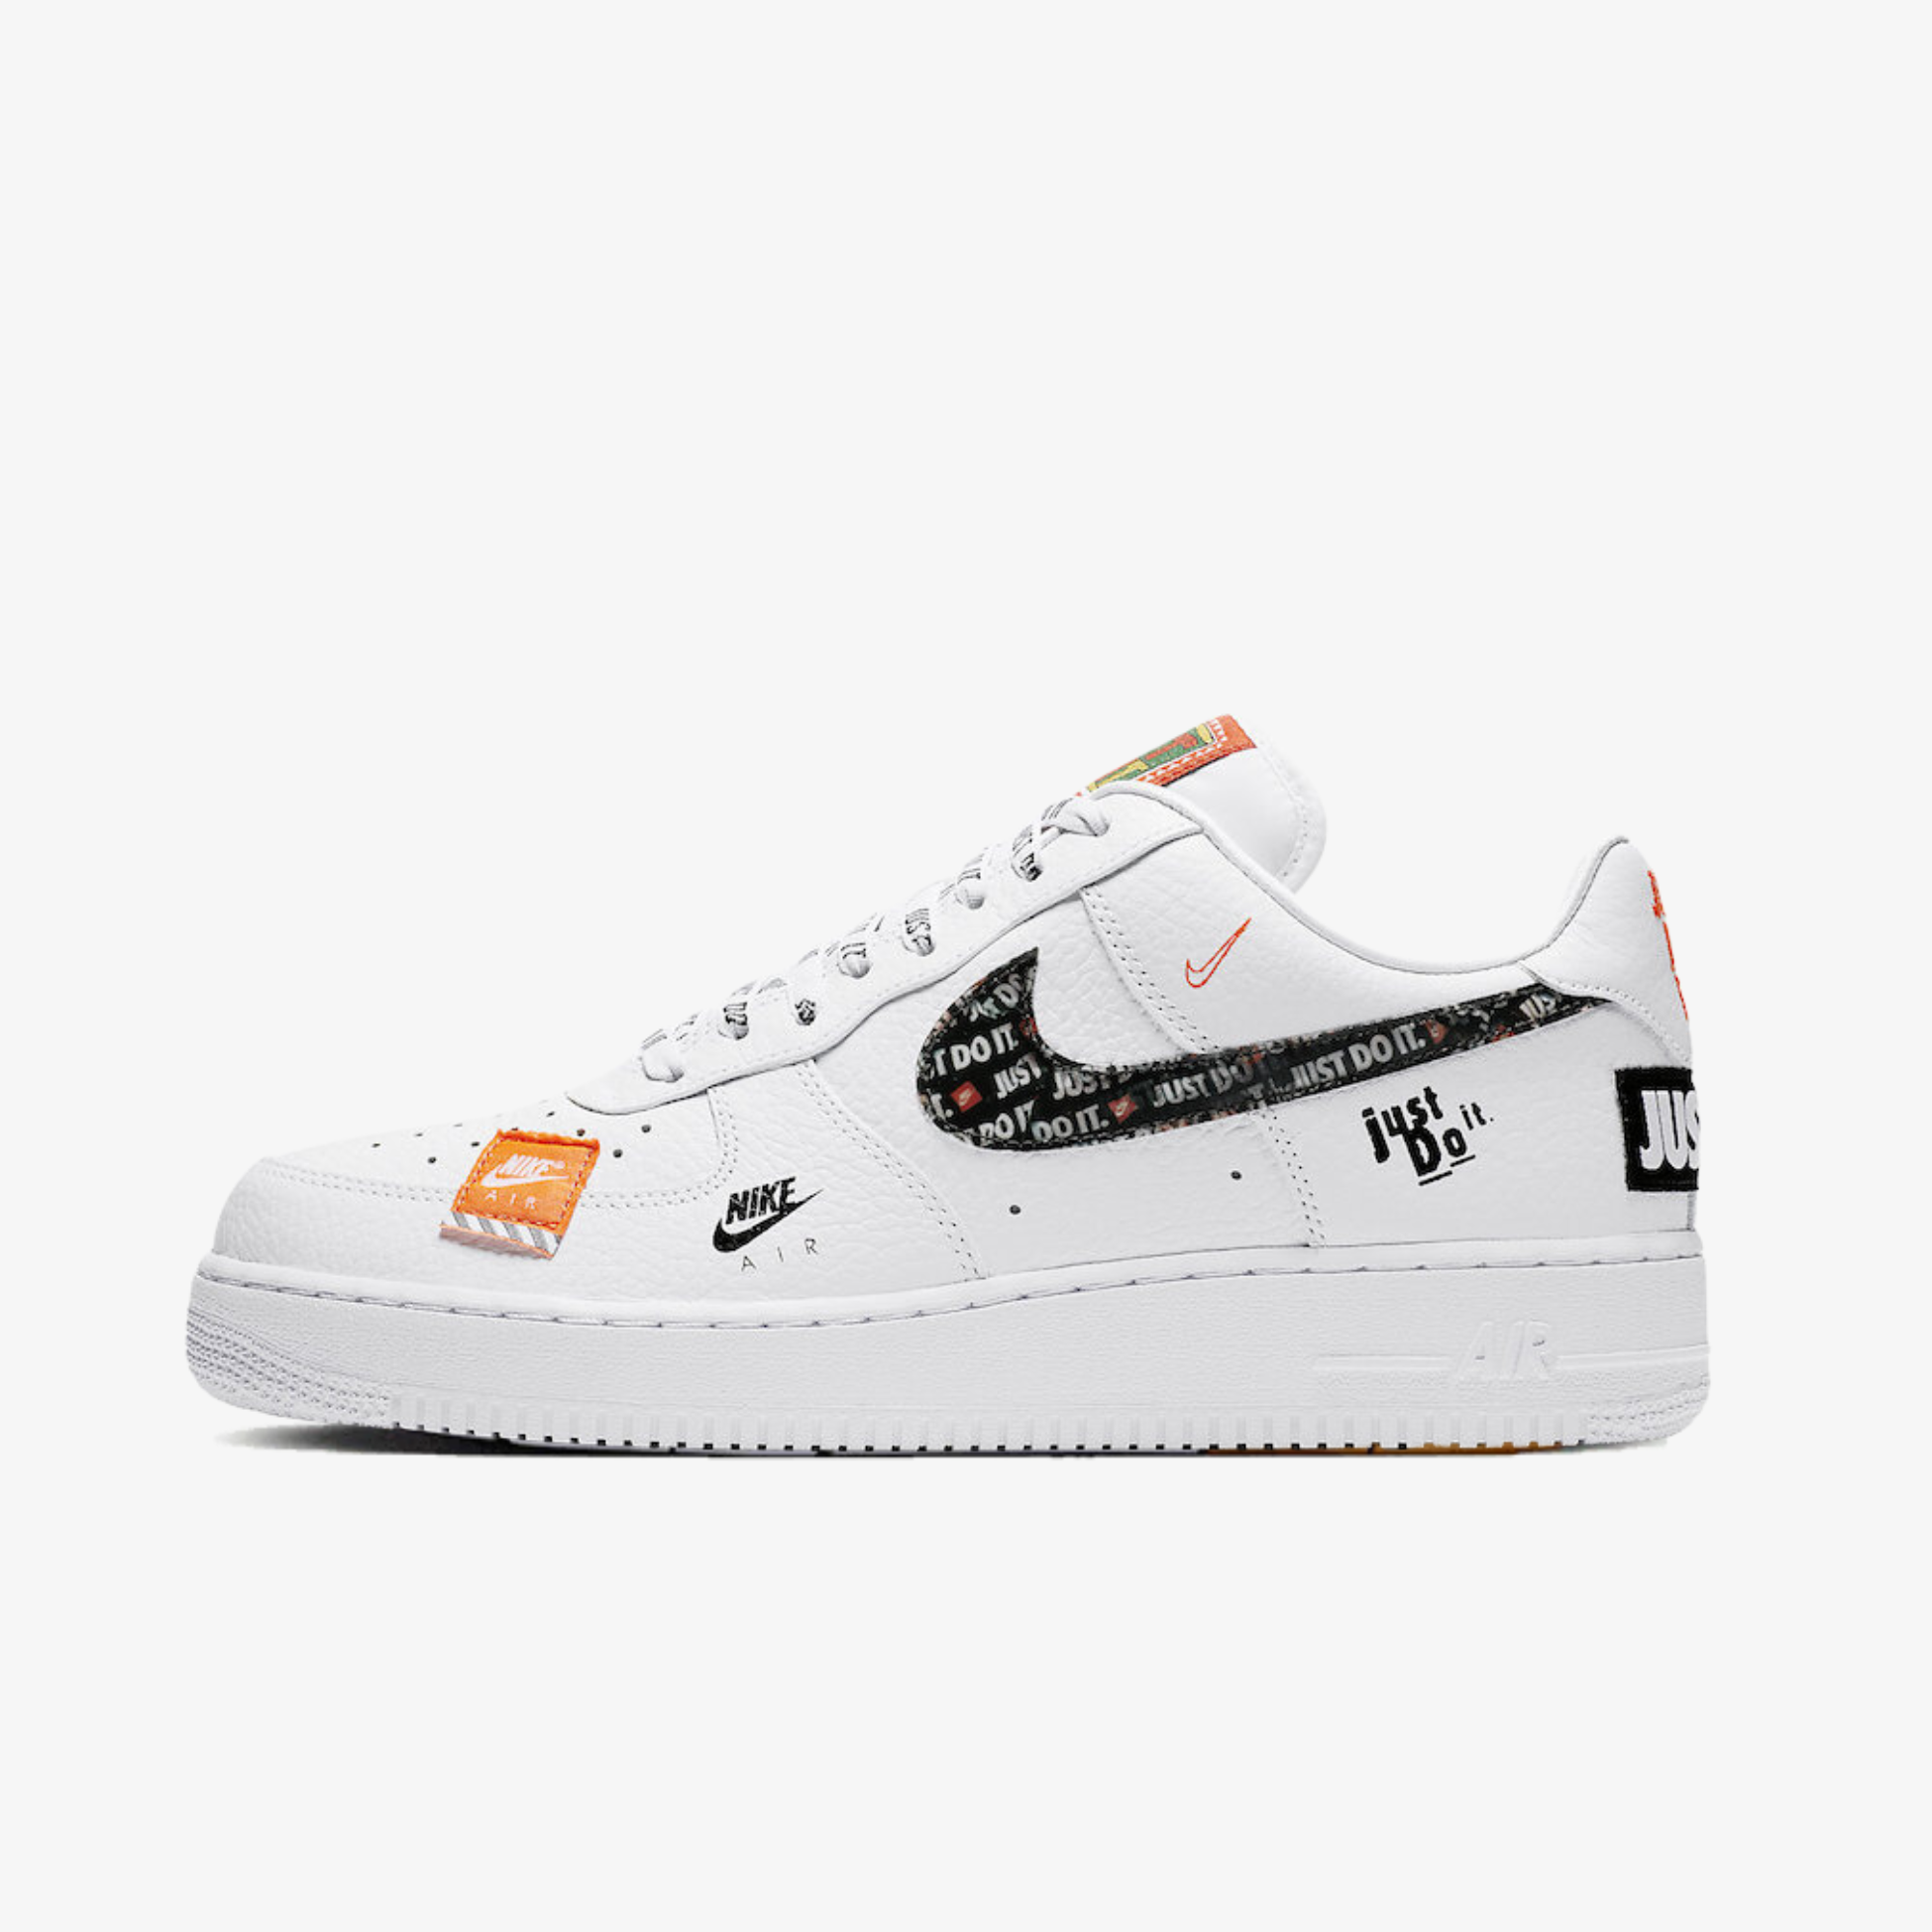 Nike Air Force 1 ’07 PRM “Just Do It” White